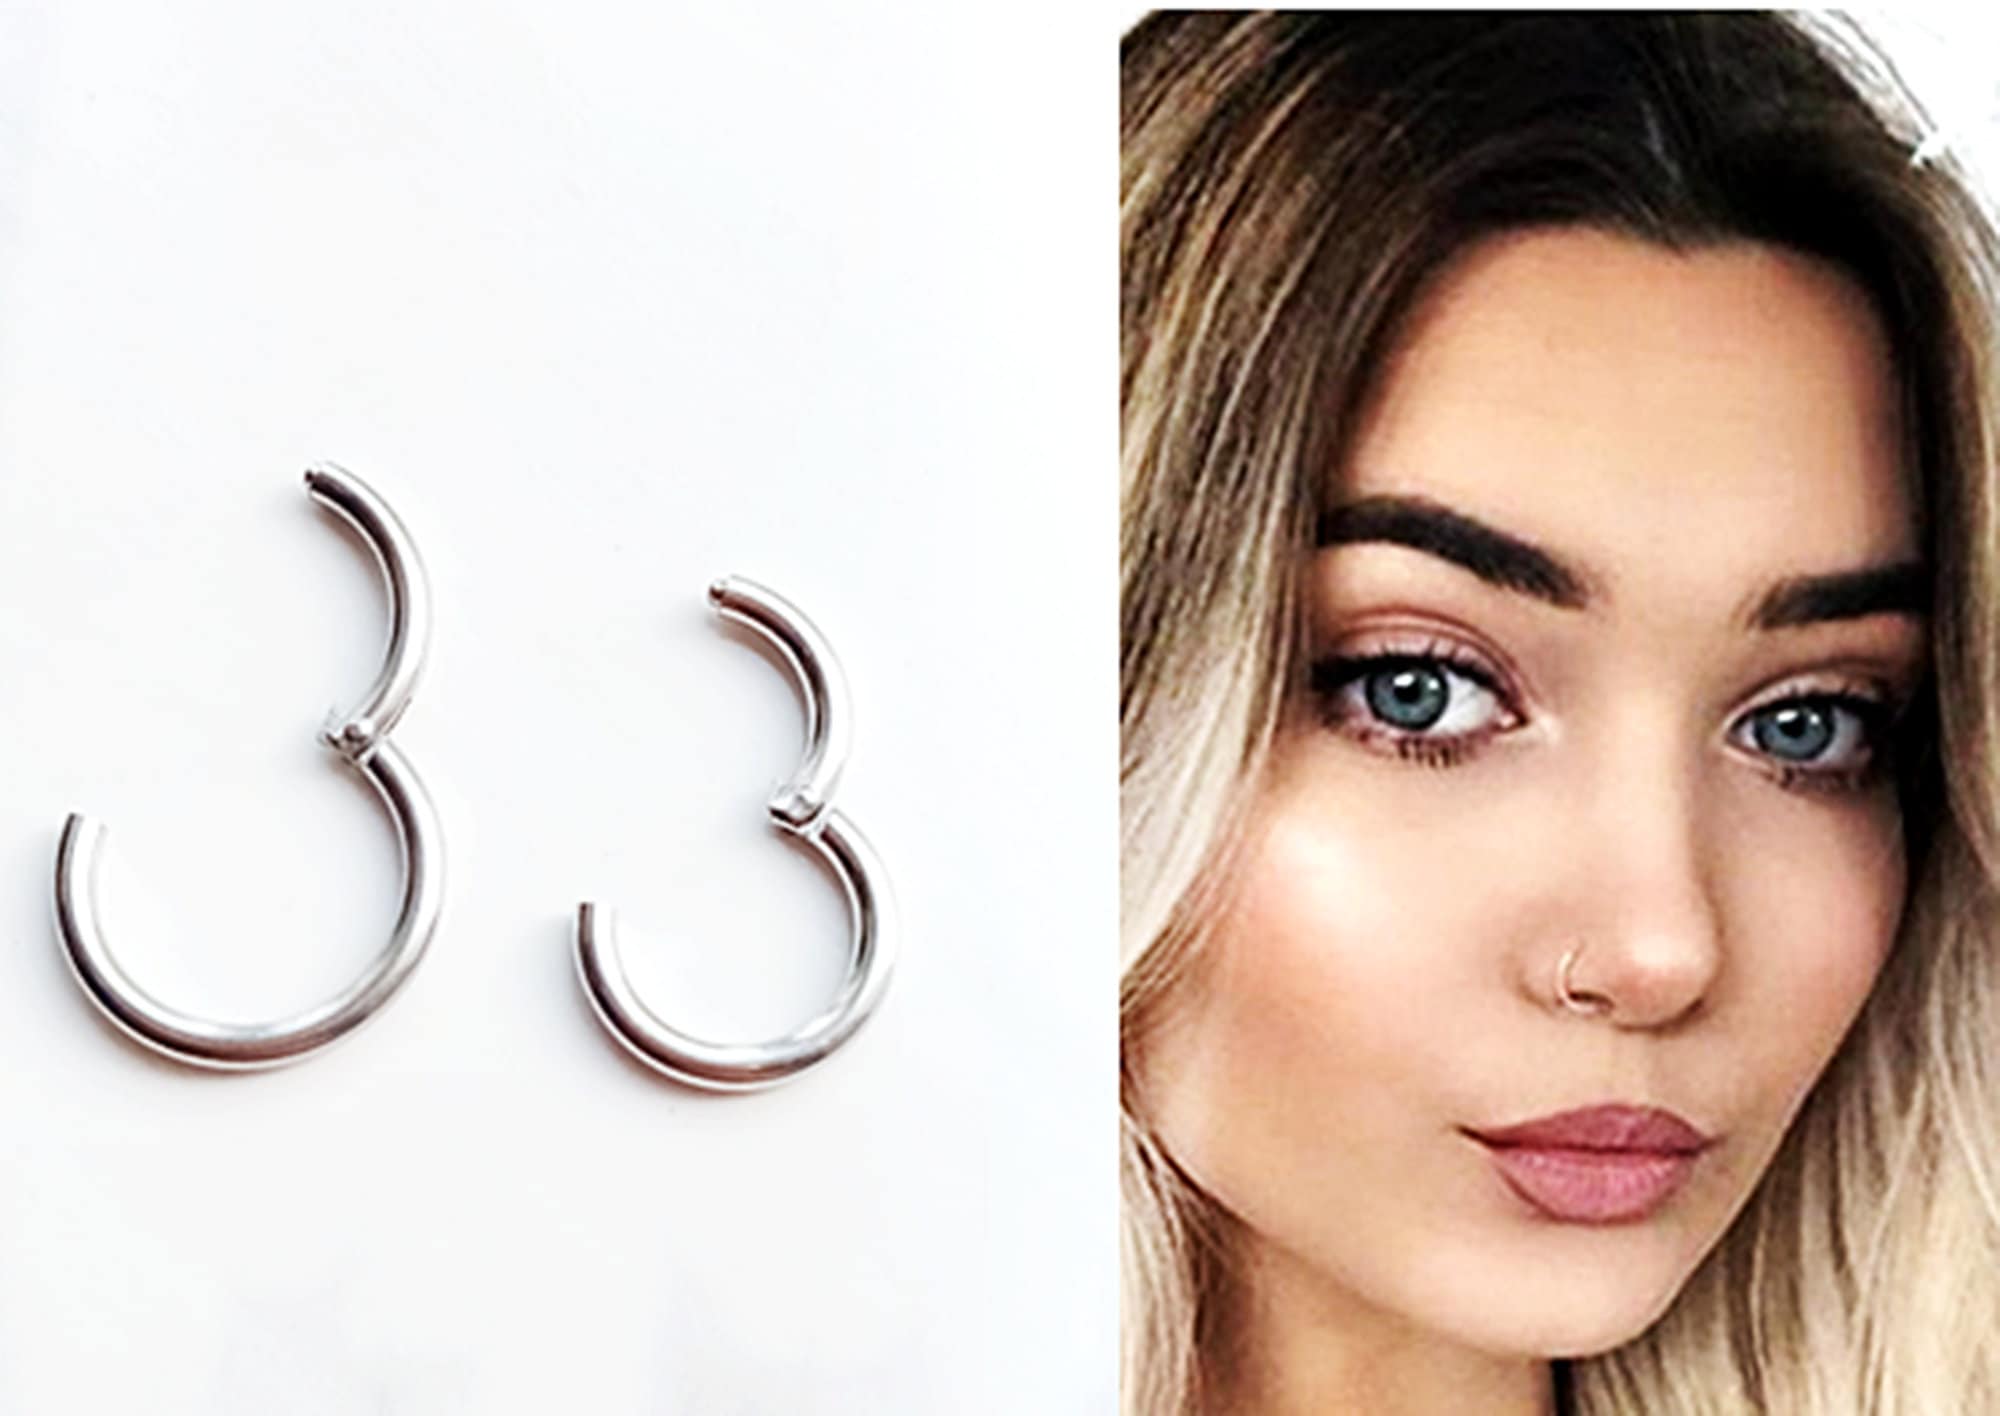 Simple Small Nose Stud Ring Nose Hoop Cartilage Hoop Ring | Etsy